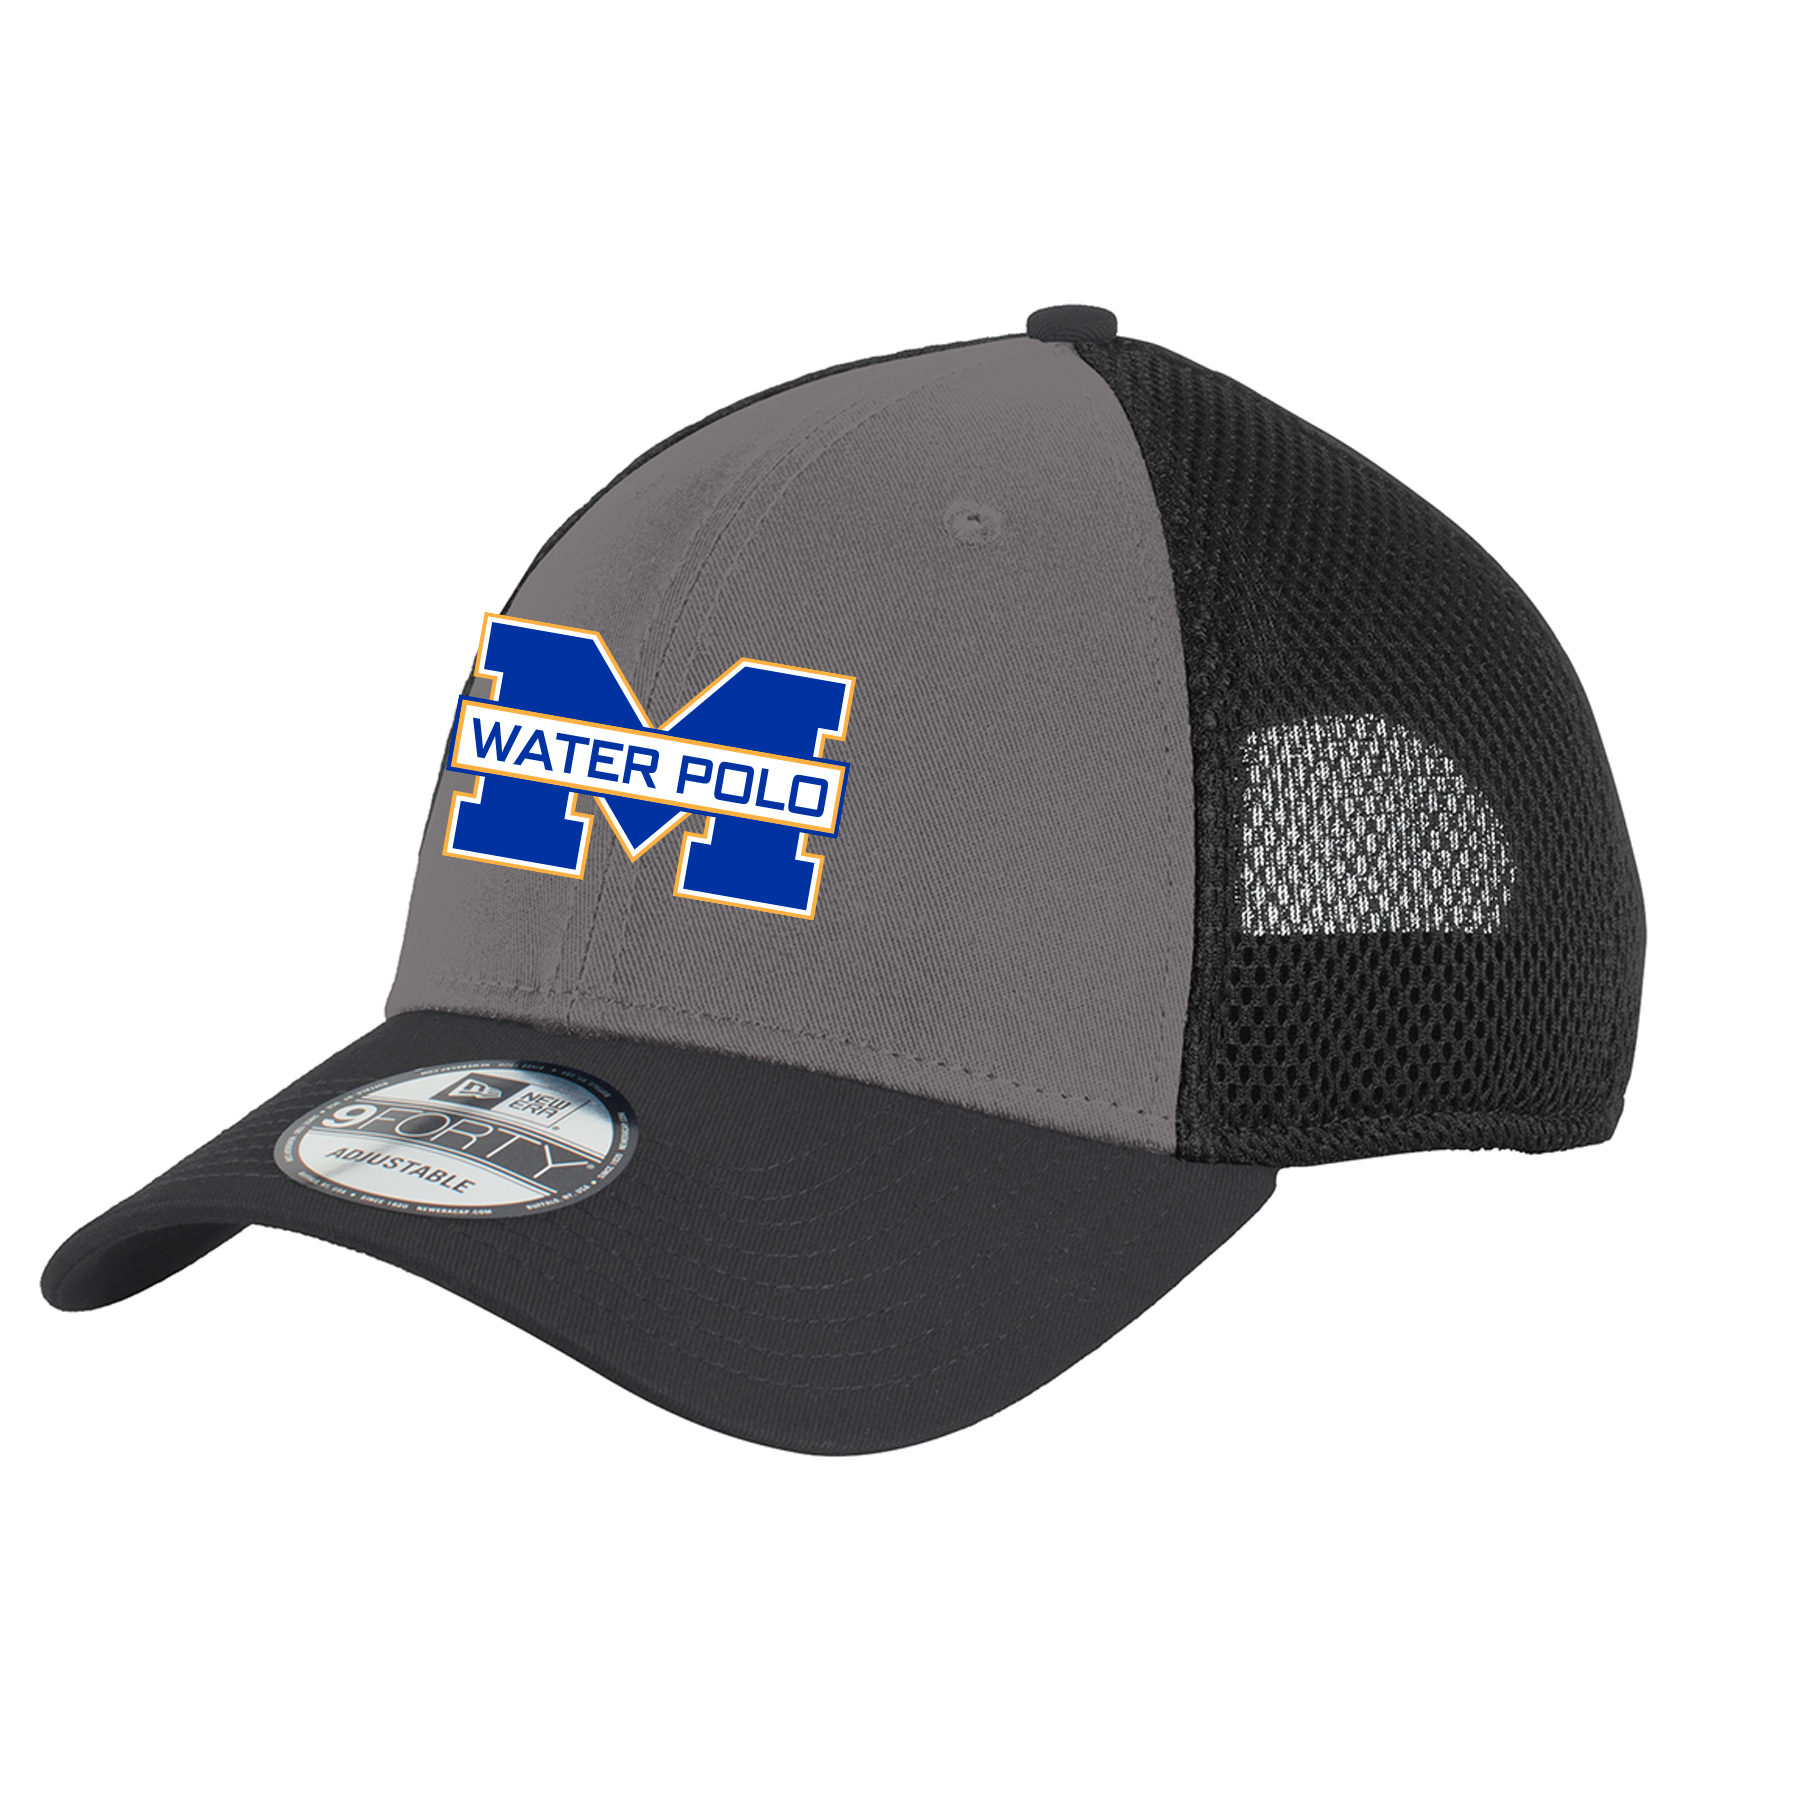 MIRA MESA WATER POLO - EMBROIDERED CAP